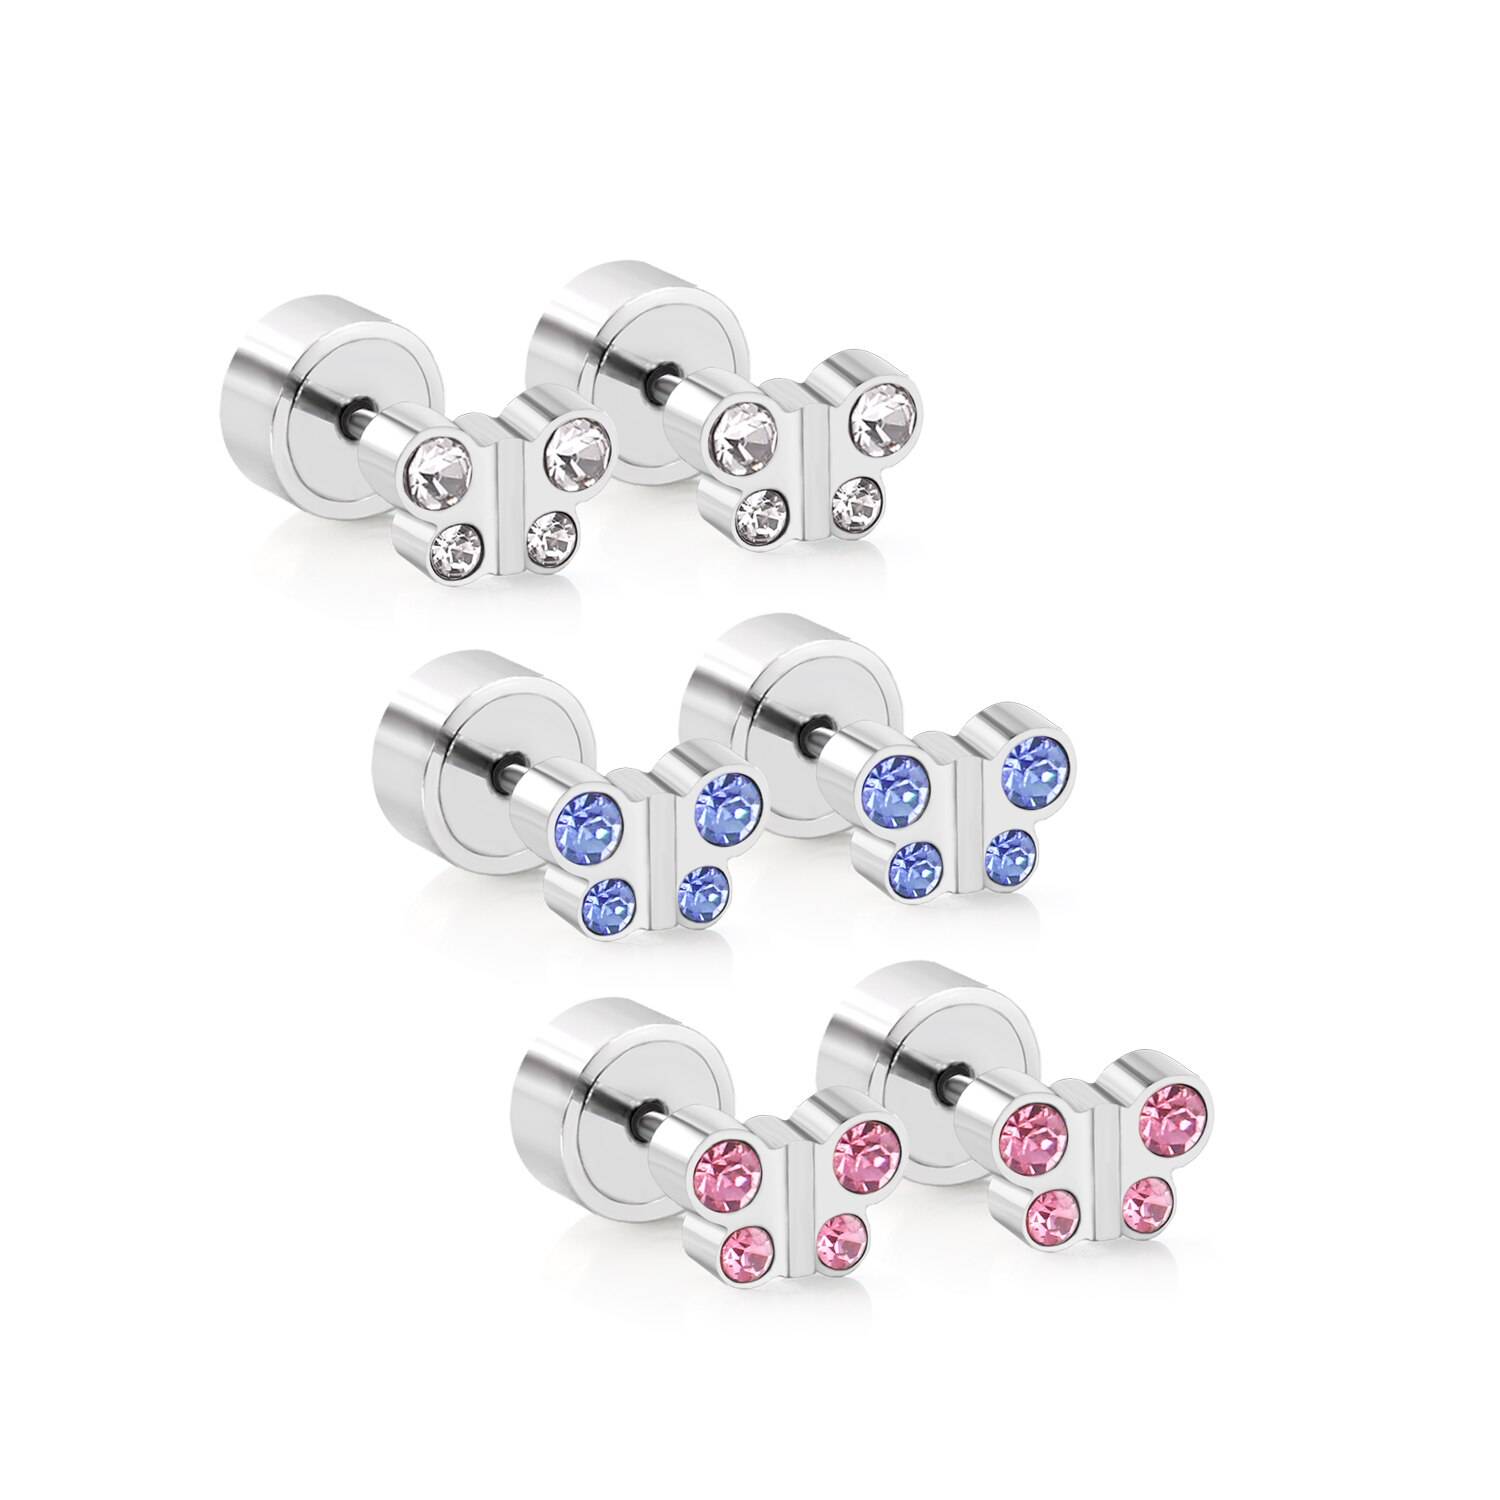 Cute Colourful Cubic Zirconia Stud Earrings for Girls – NAOMI Uncategorized Children's Jewellery 8d255f28538fbae46aeae7: as picture|Blue|butterfly blue|butterfly colorful|butterfly silver|colorful heart|pink|pink heart|Silver|silver heart|silver red|star AB crystal|star colorful|star silver